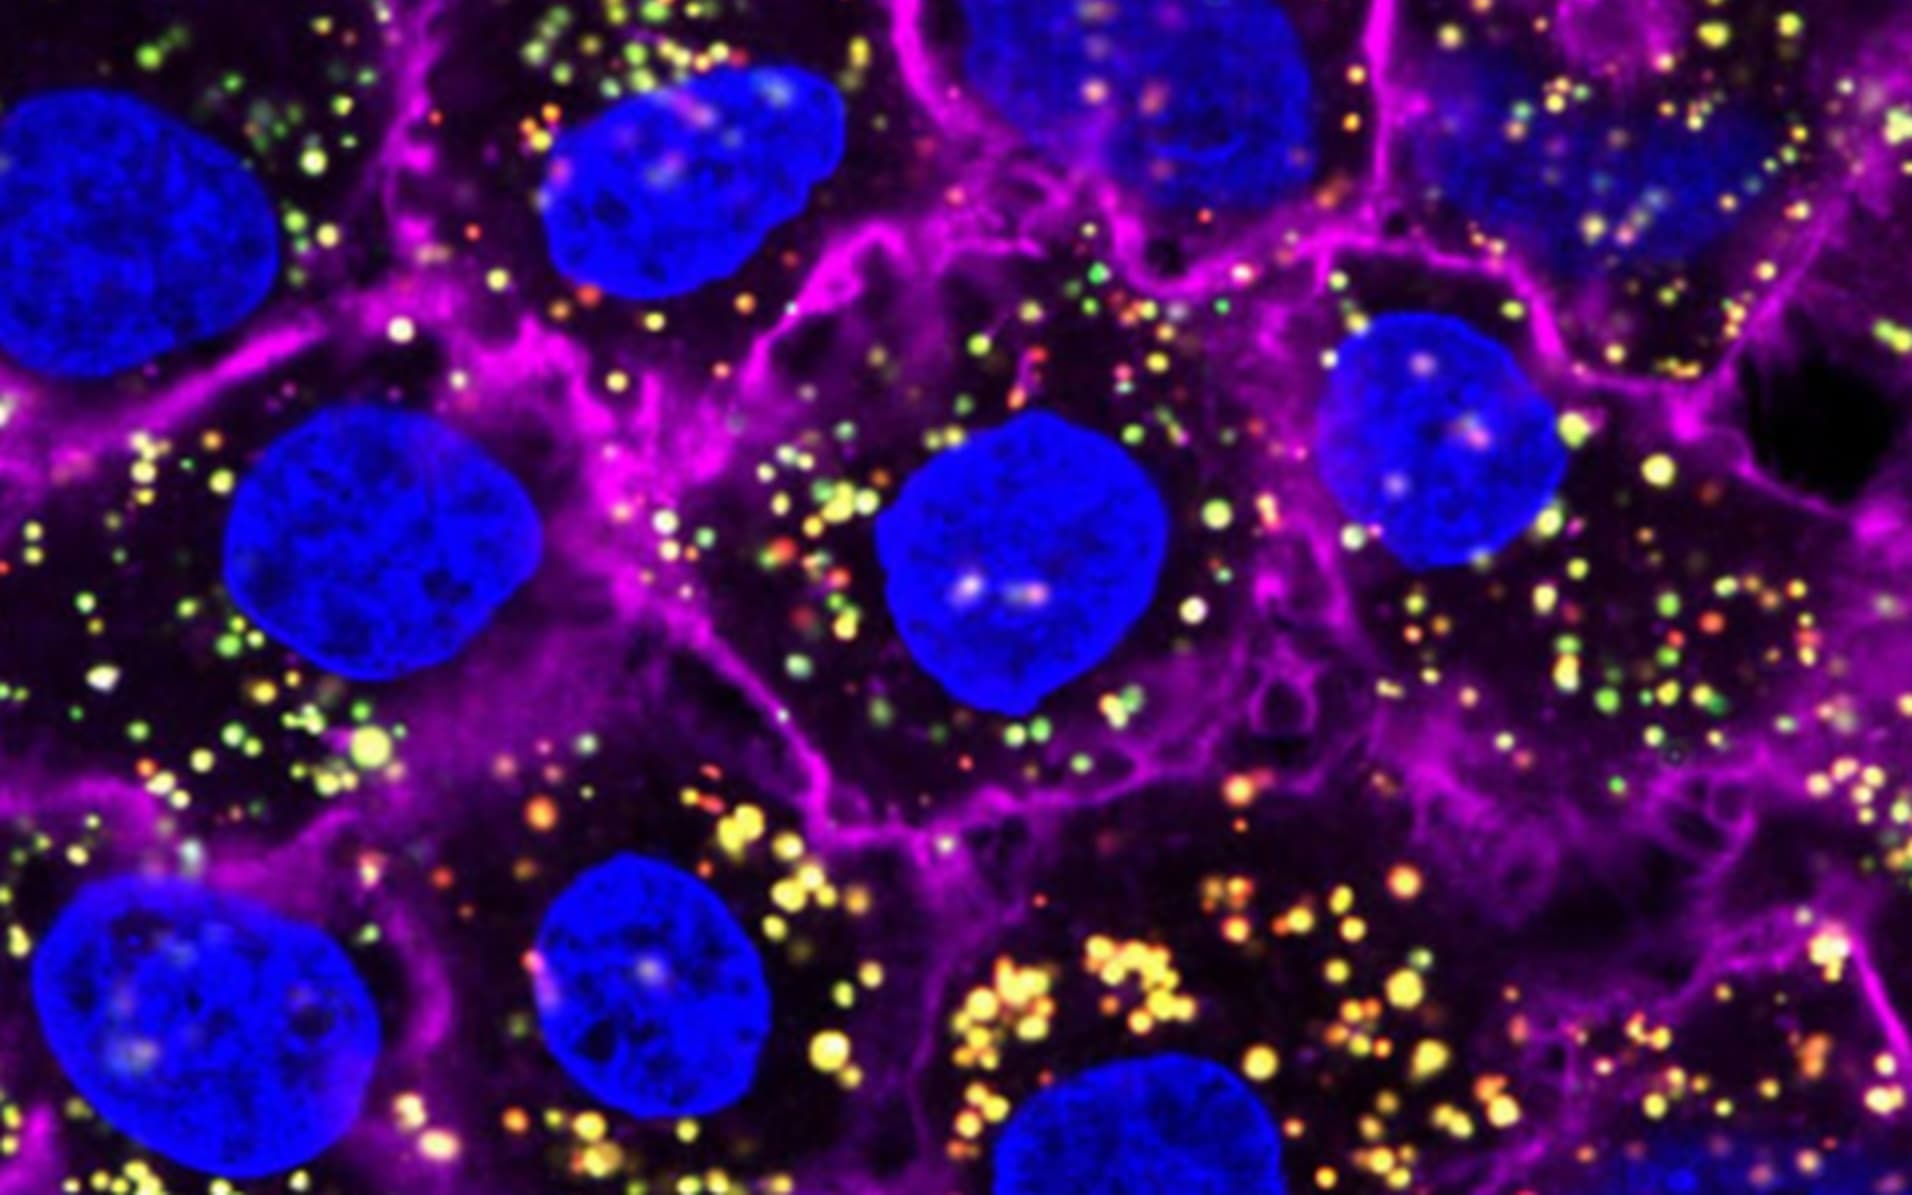 Nanoparticles (yellow) targeting and entering cancer cells (blue